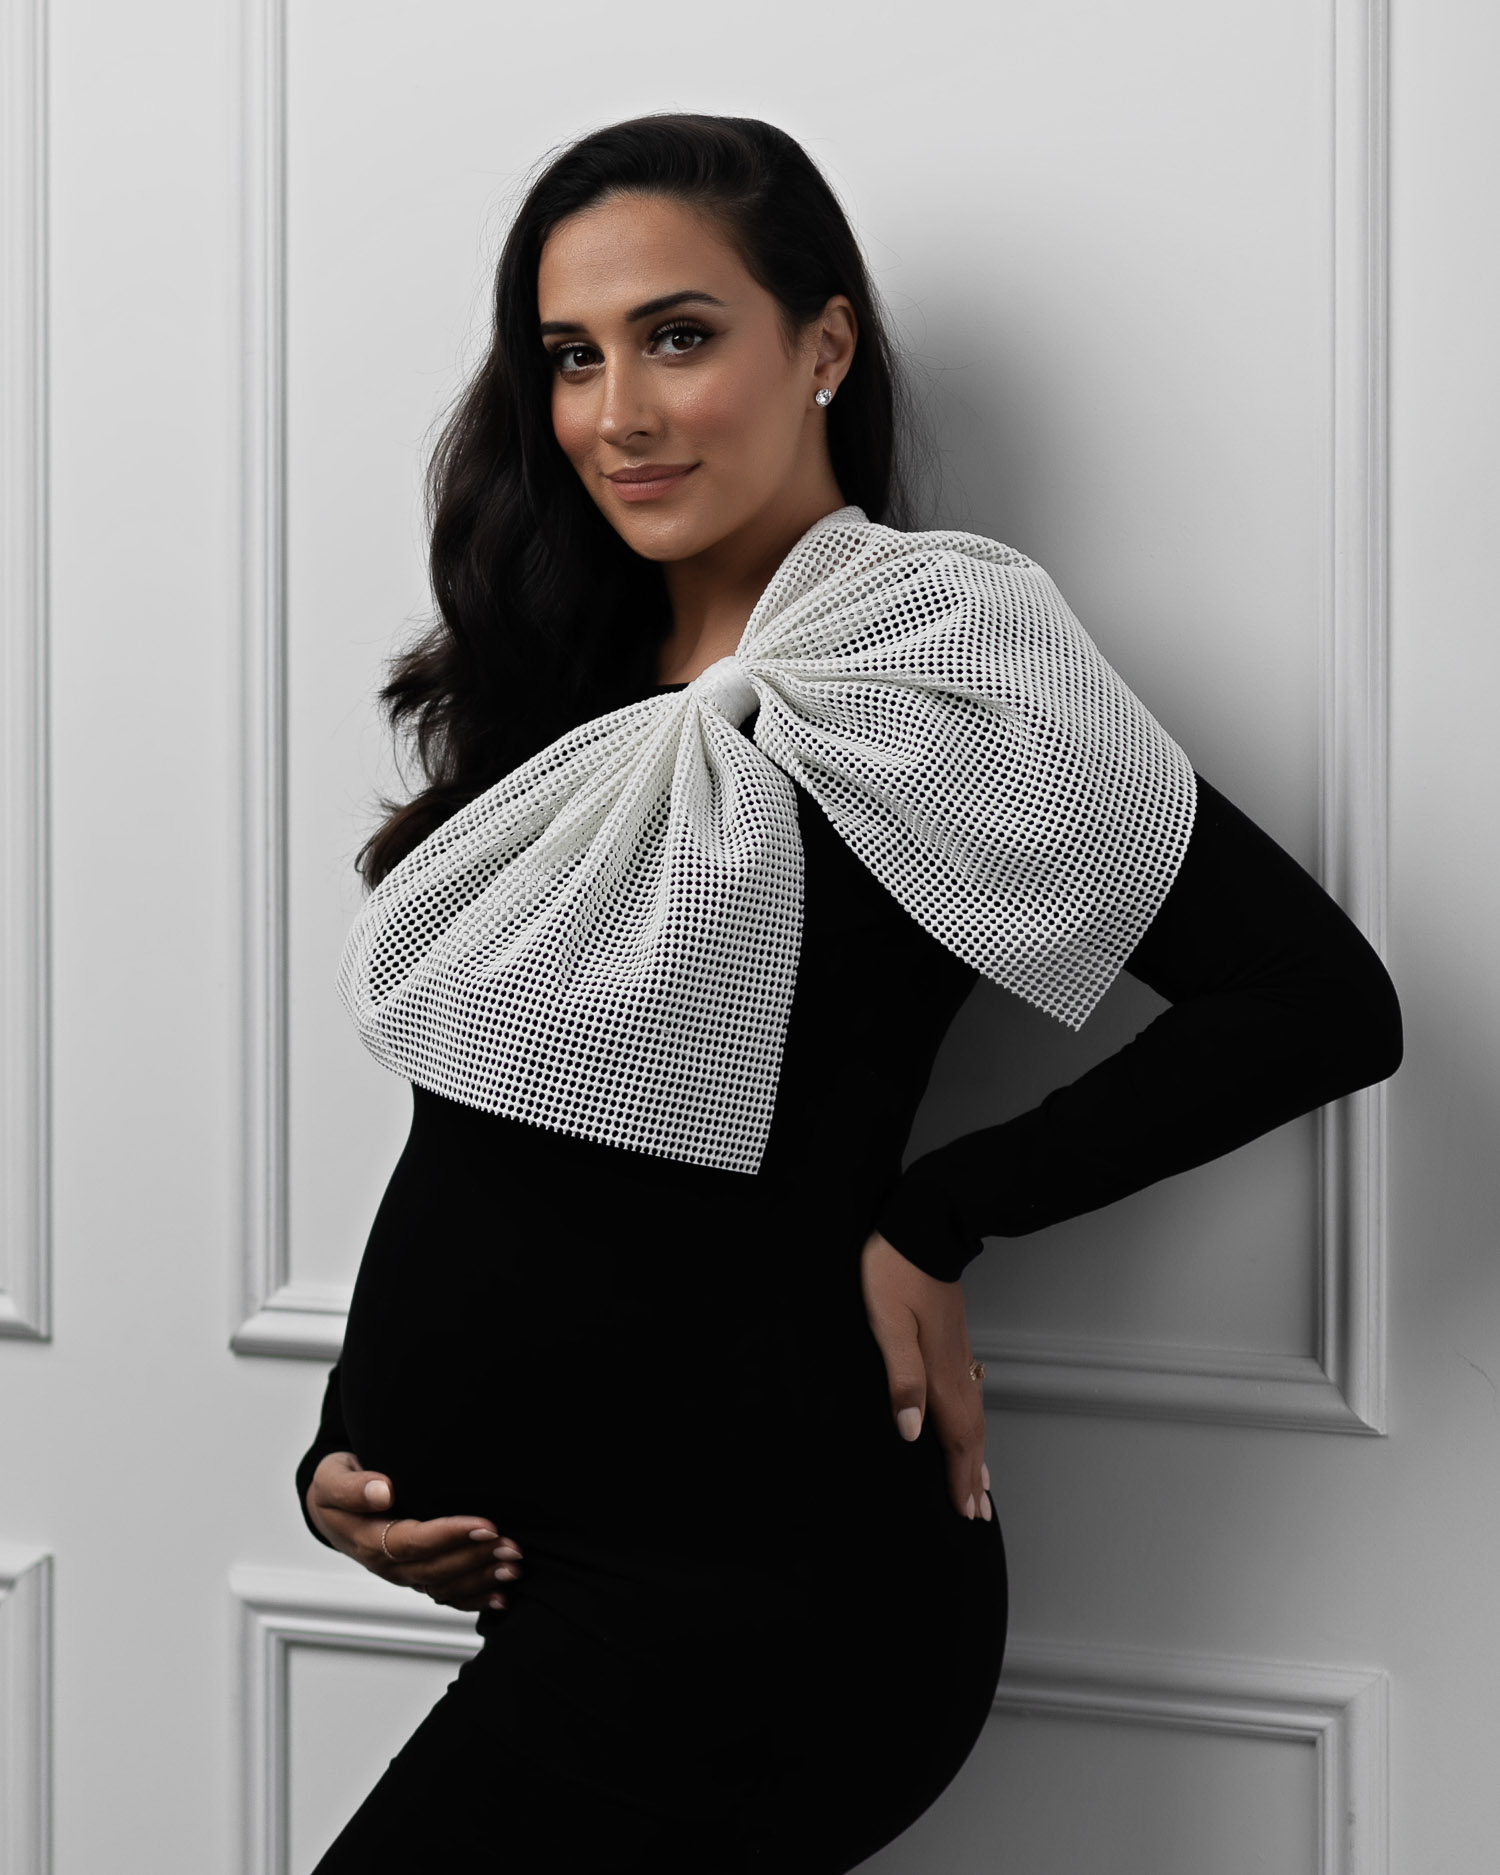 Pregnant woman wearing a black dress with a white bow.